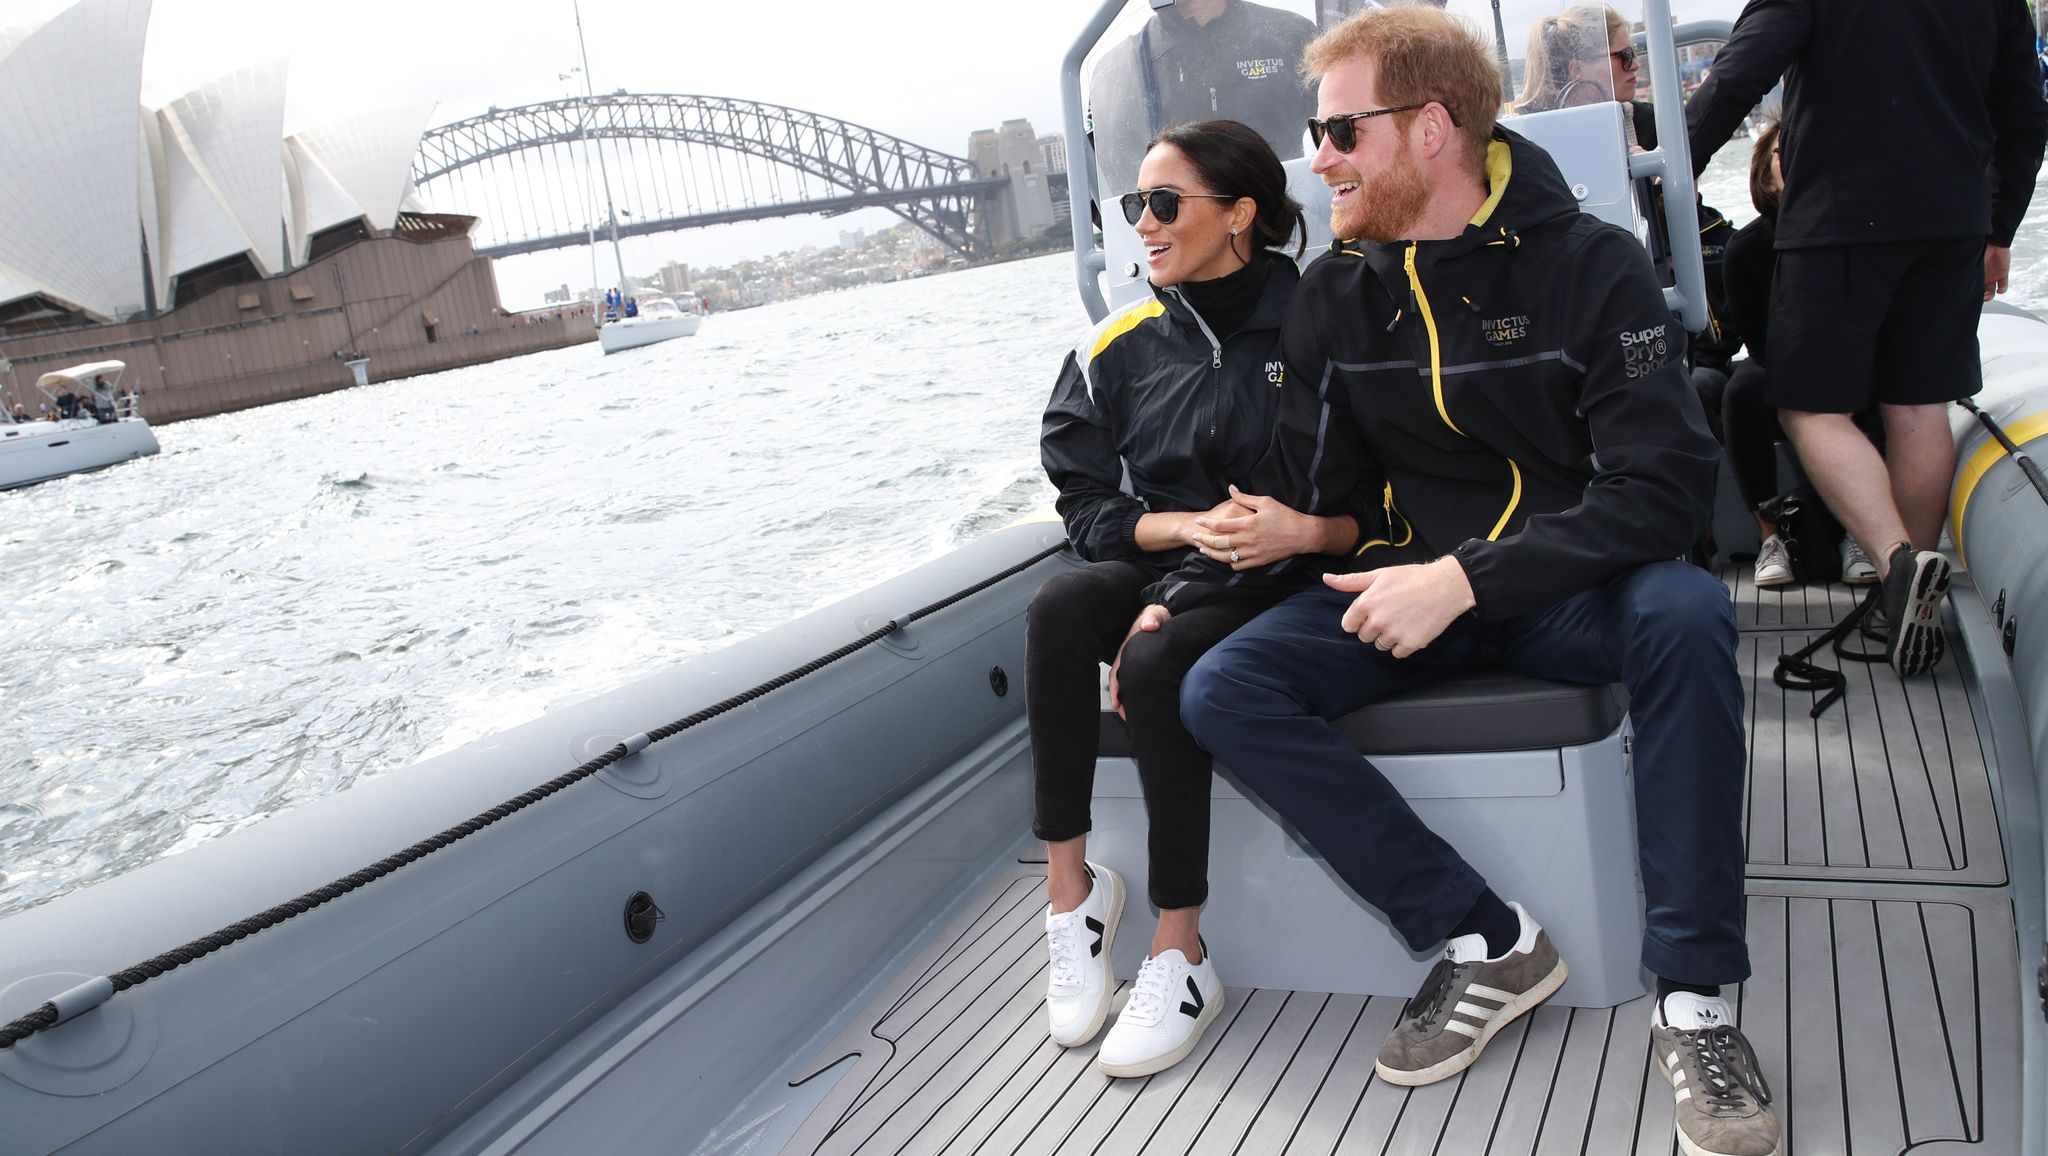 The Duke And Duchess Of Sussex Visit Australia - Day 6